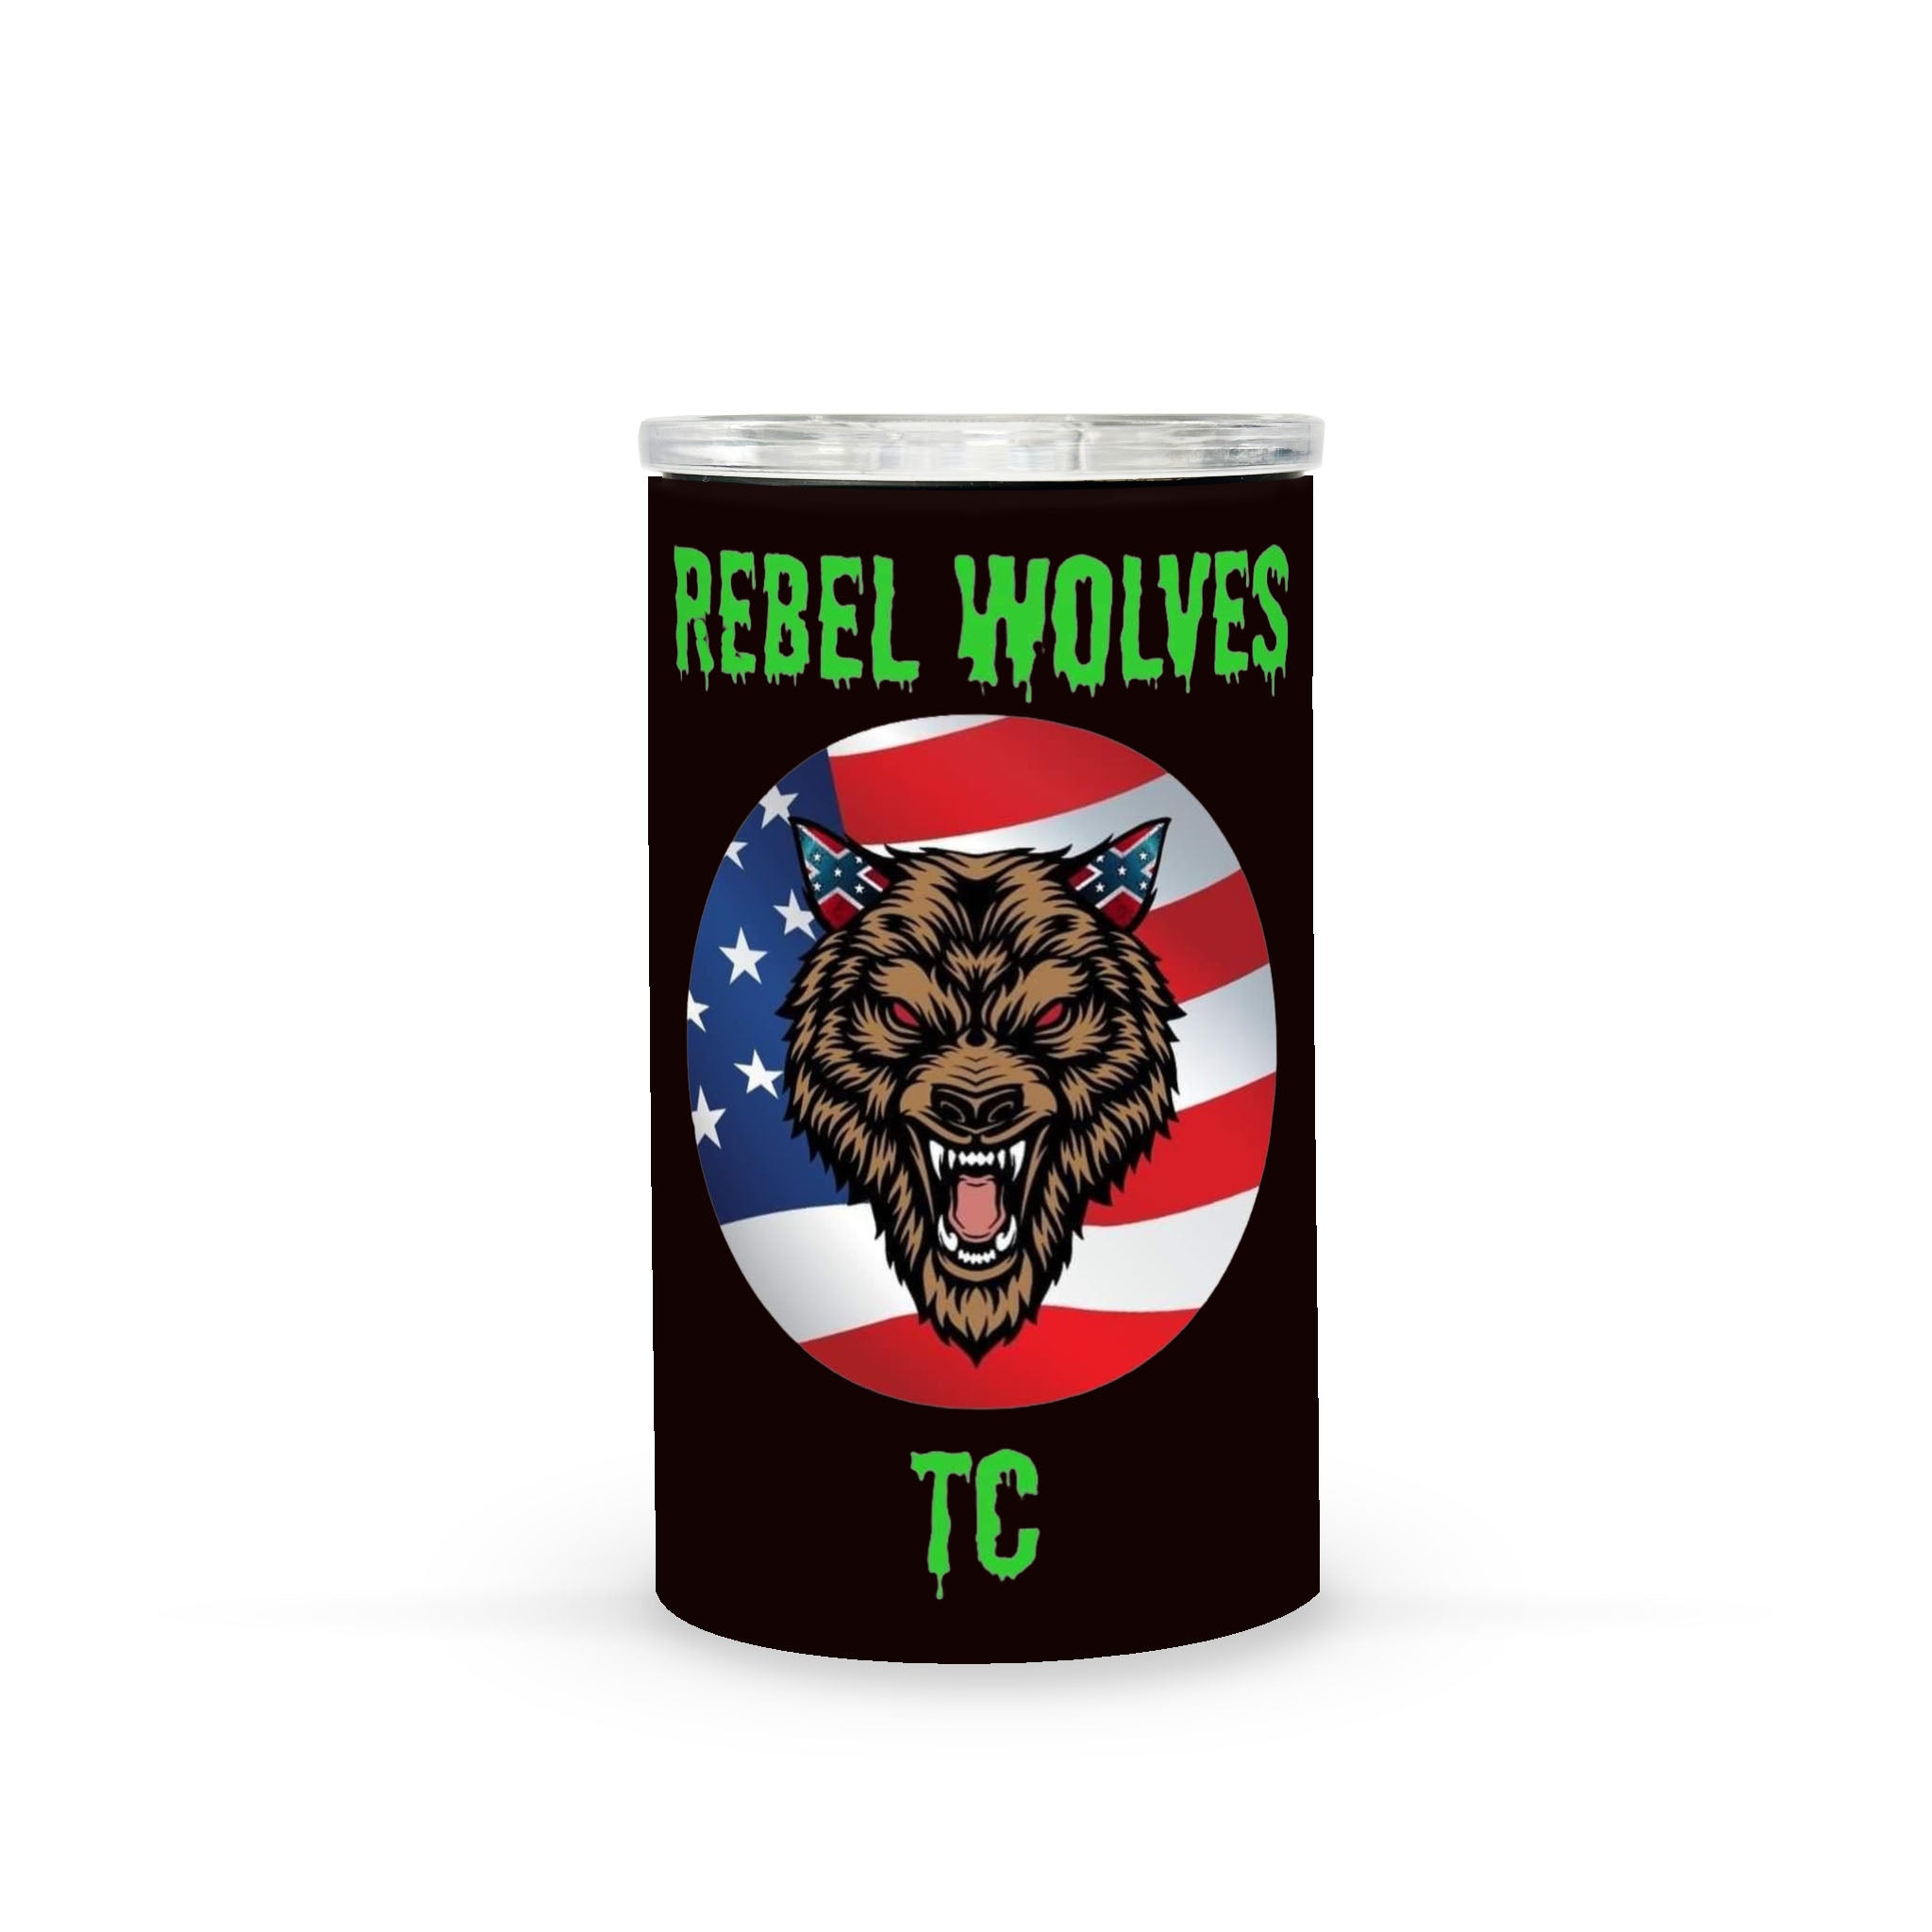 4-in-1 Can Cooler Tumbler